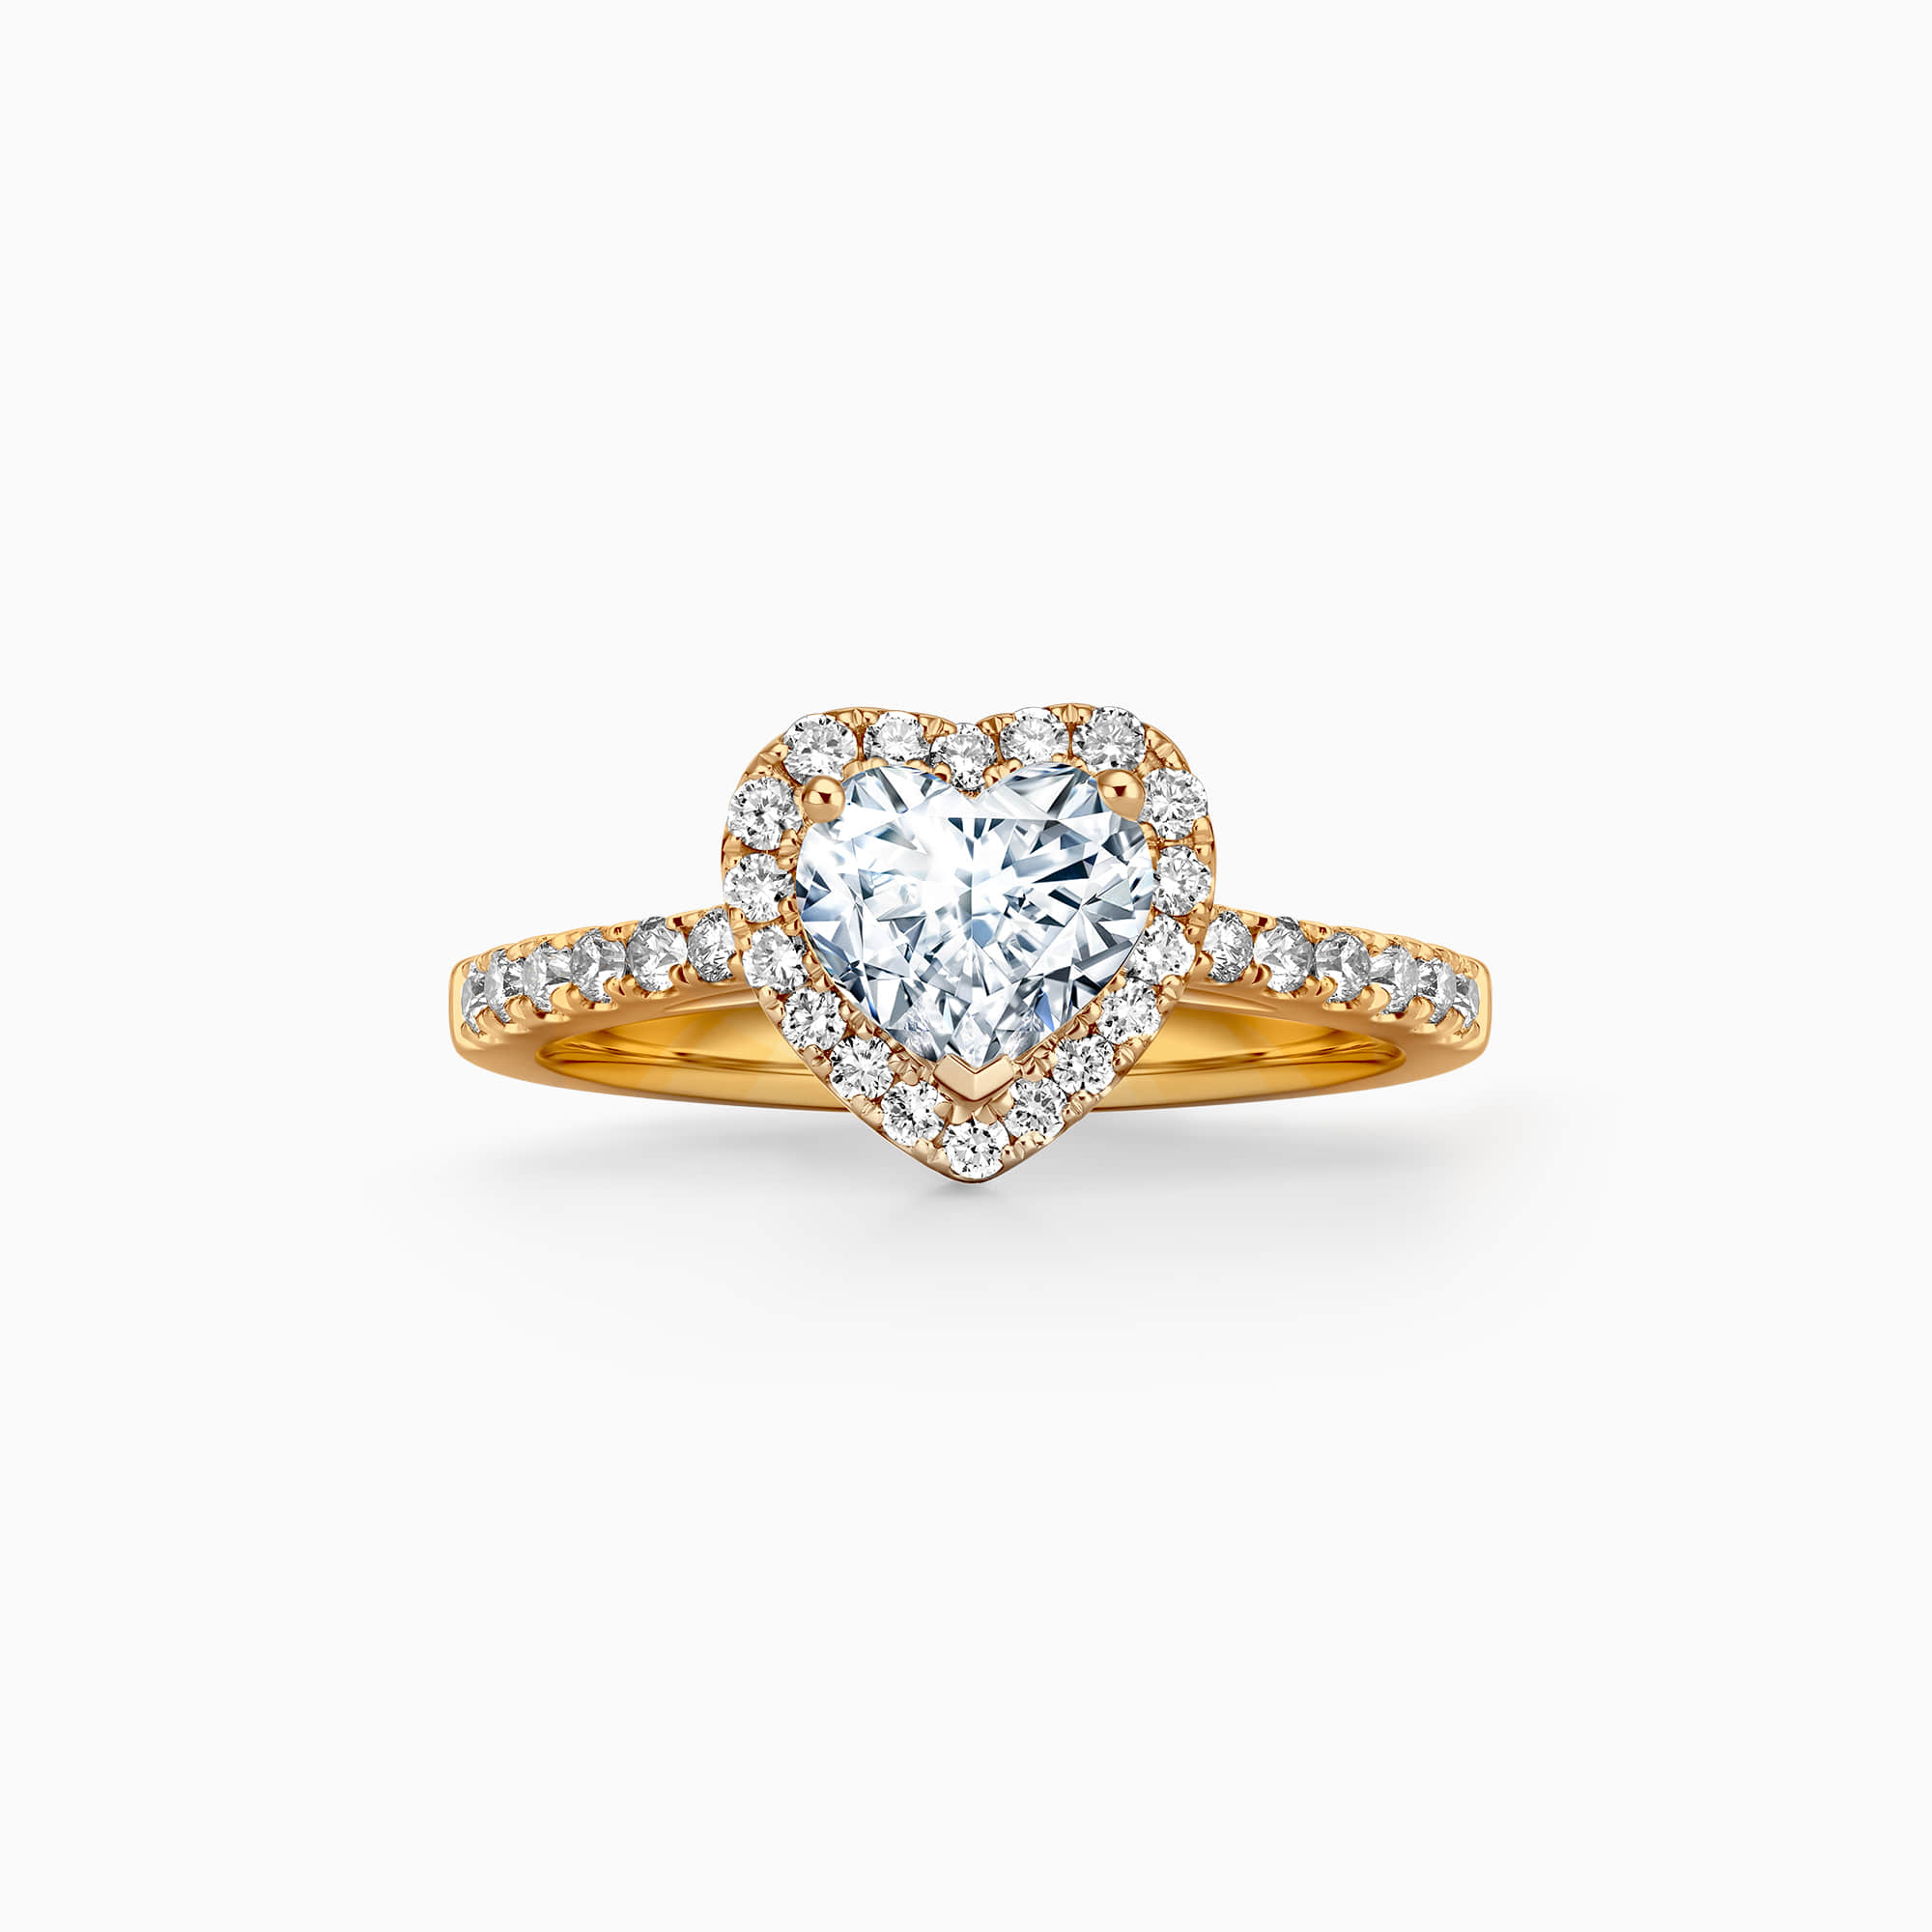 Darry Ring heart halo engagement ring in yellow gold